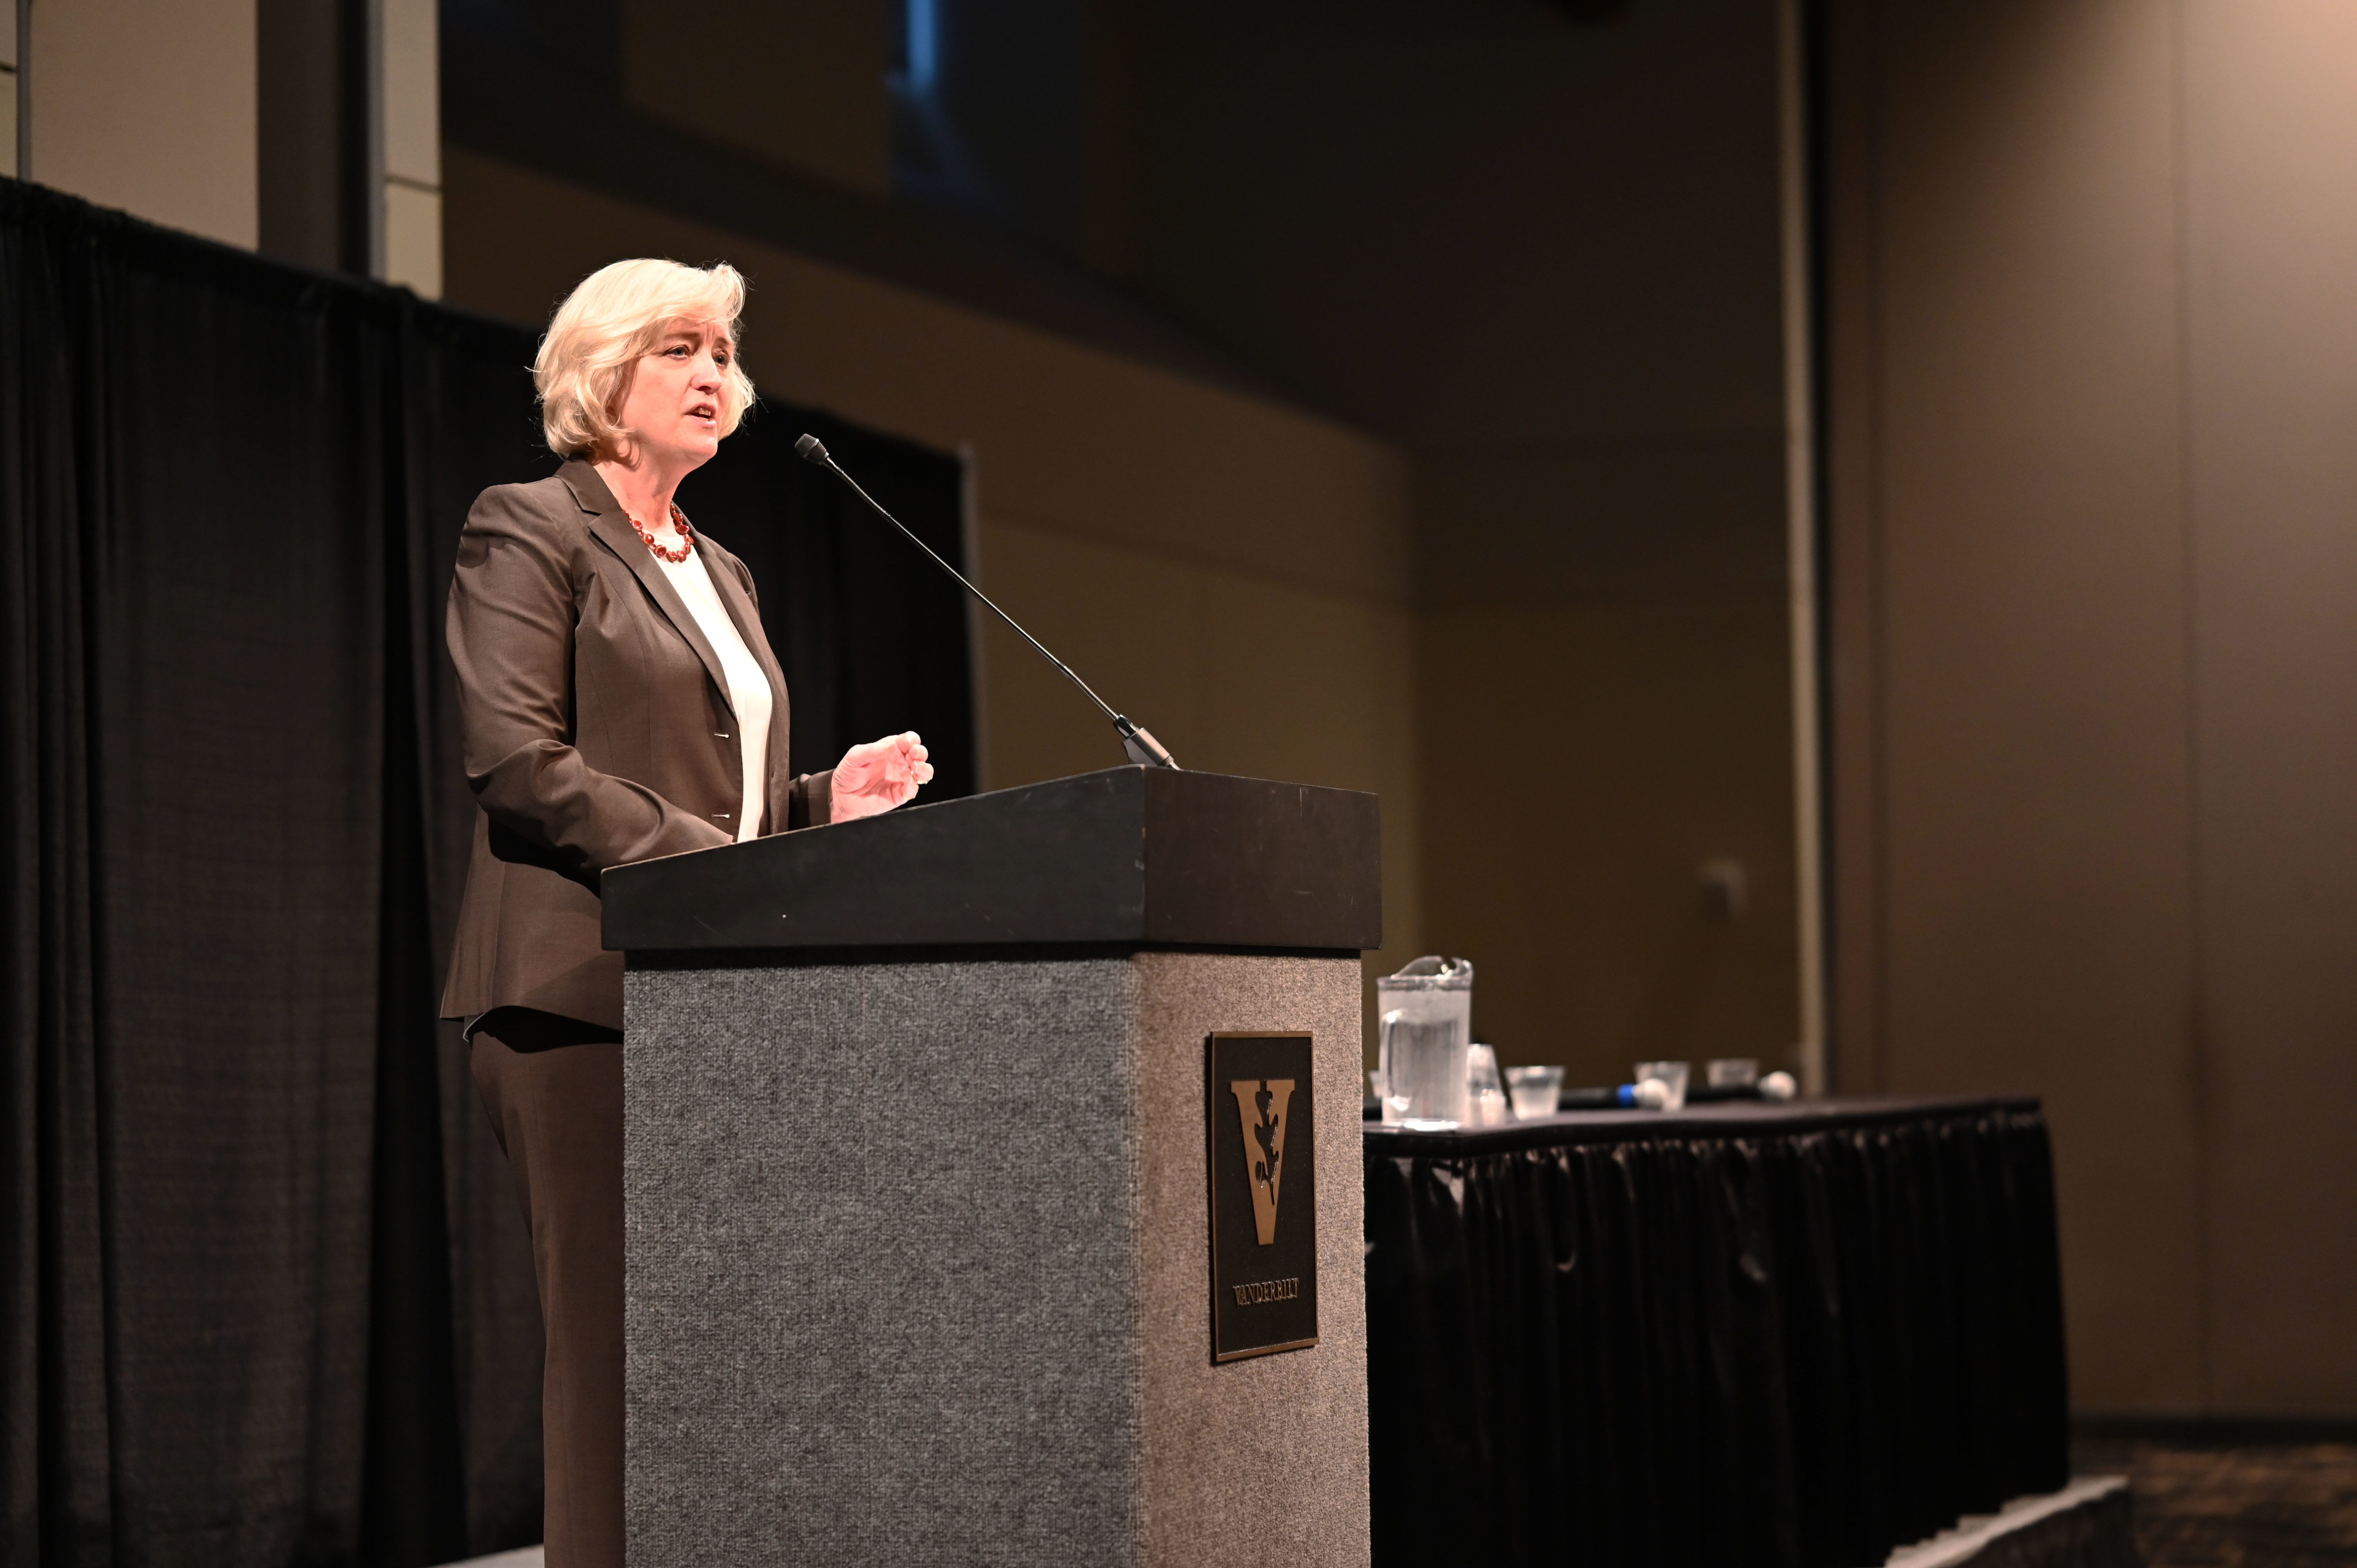 Susan R. Wente gives opening remarks at town hall gathering